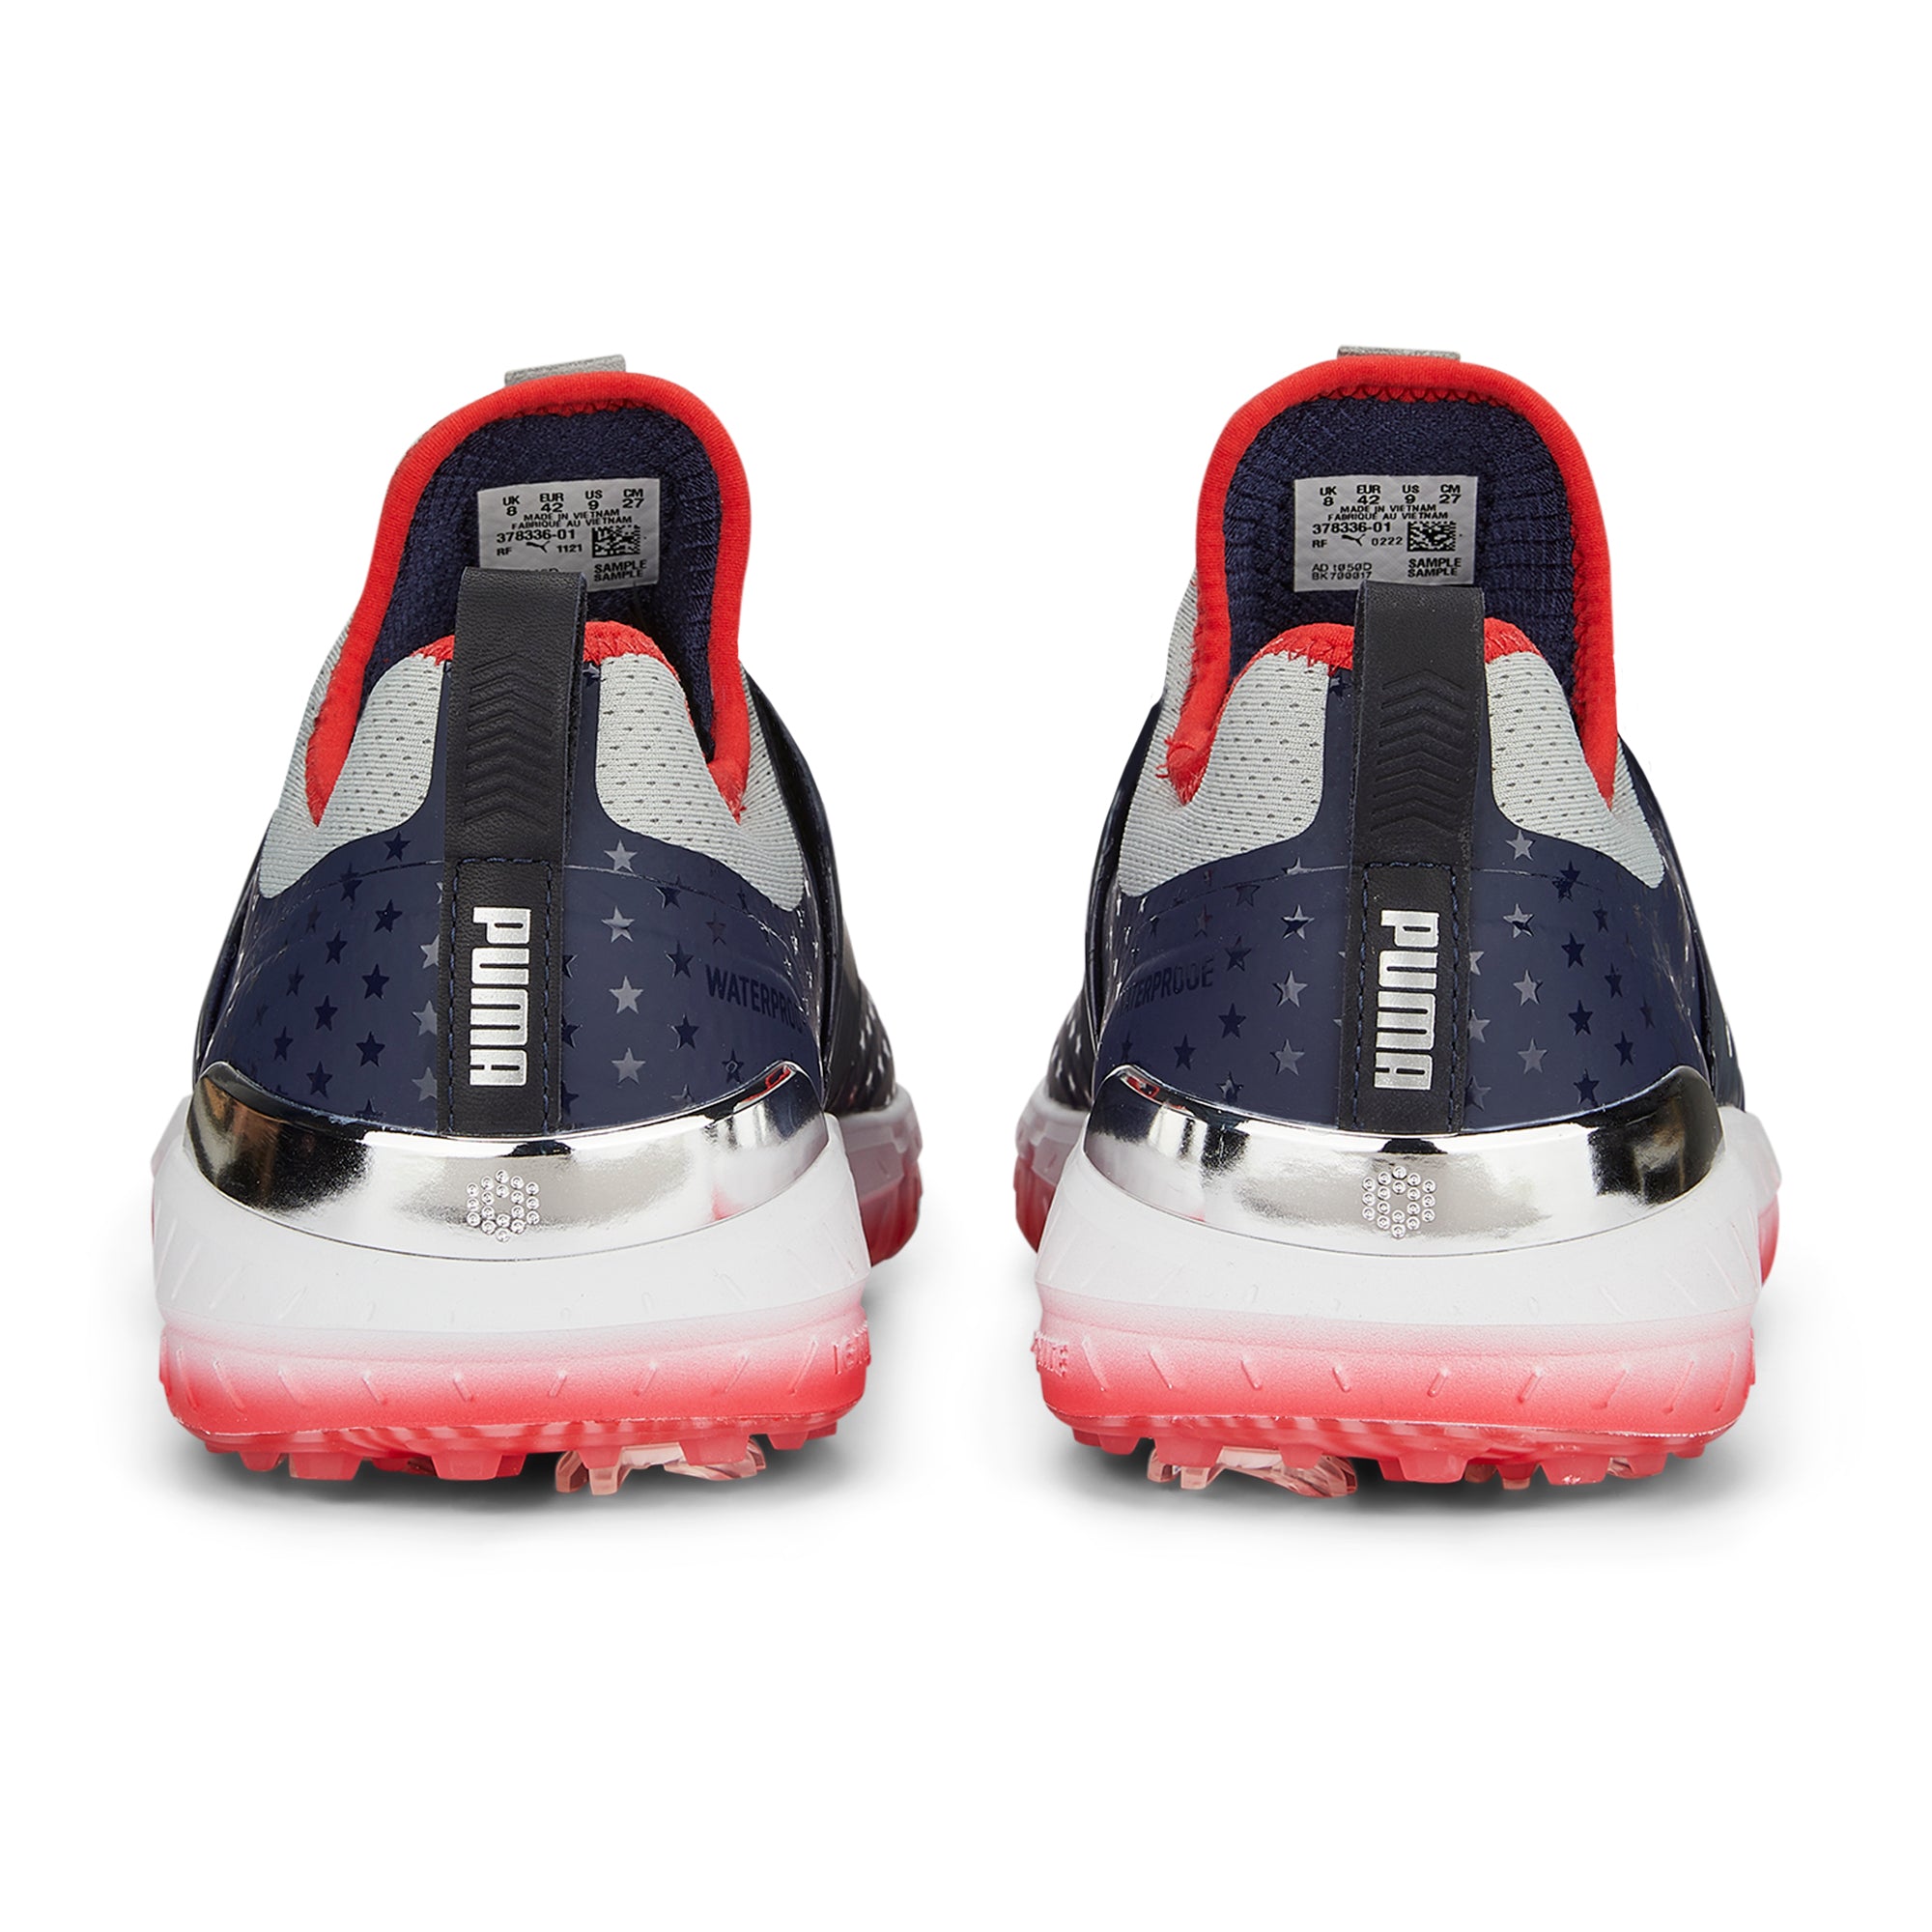 puma-ignite-articulate-stars-stripes-le-golf-shoes-378336-puma-navy-for-all-time-red-01